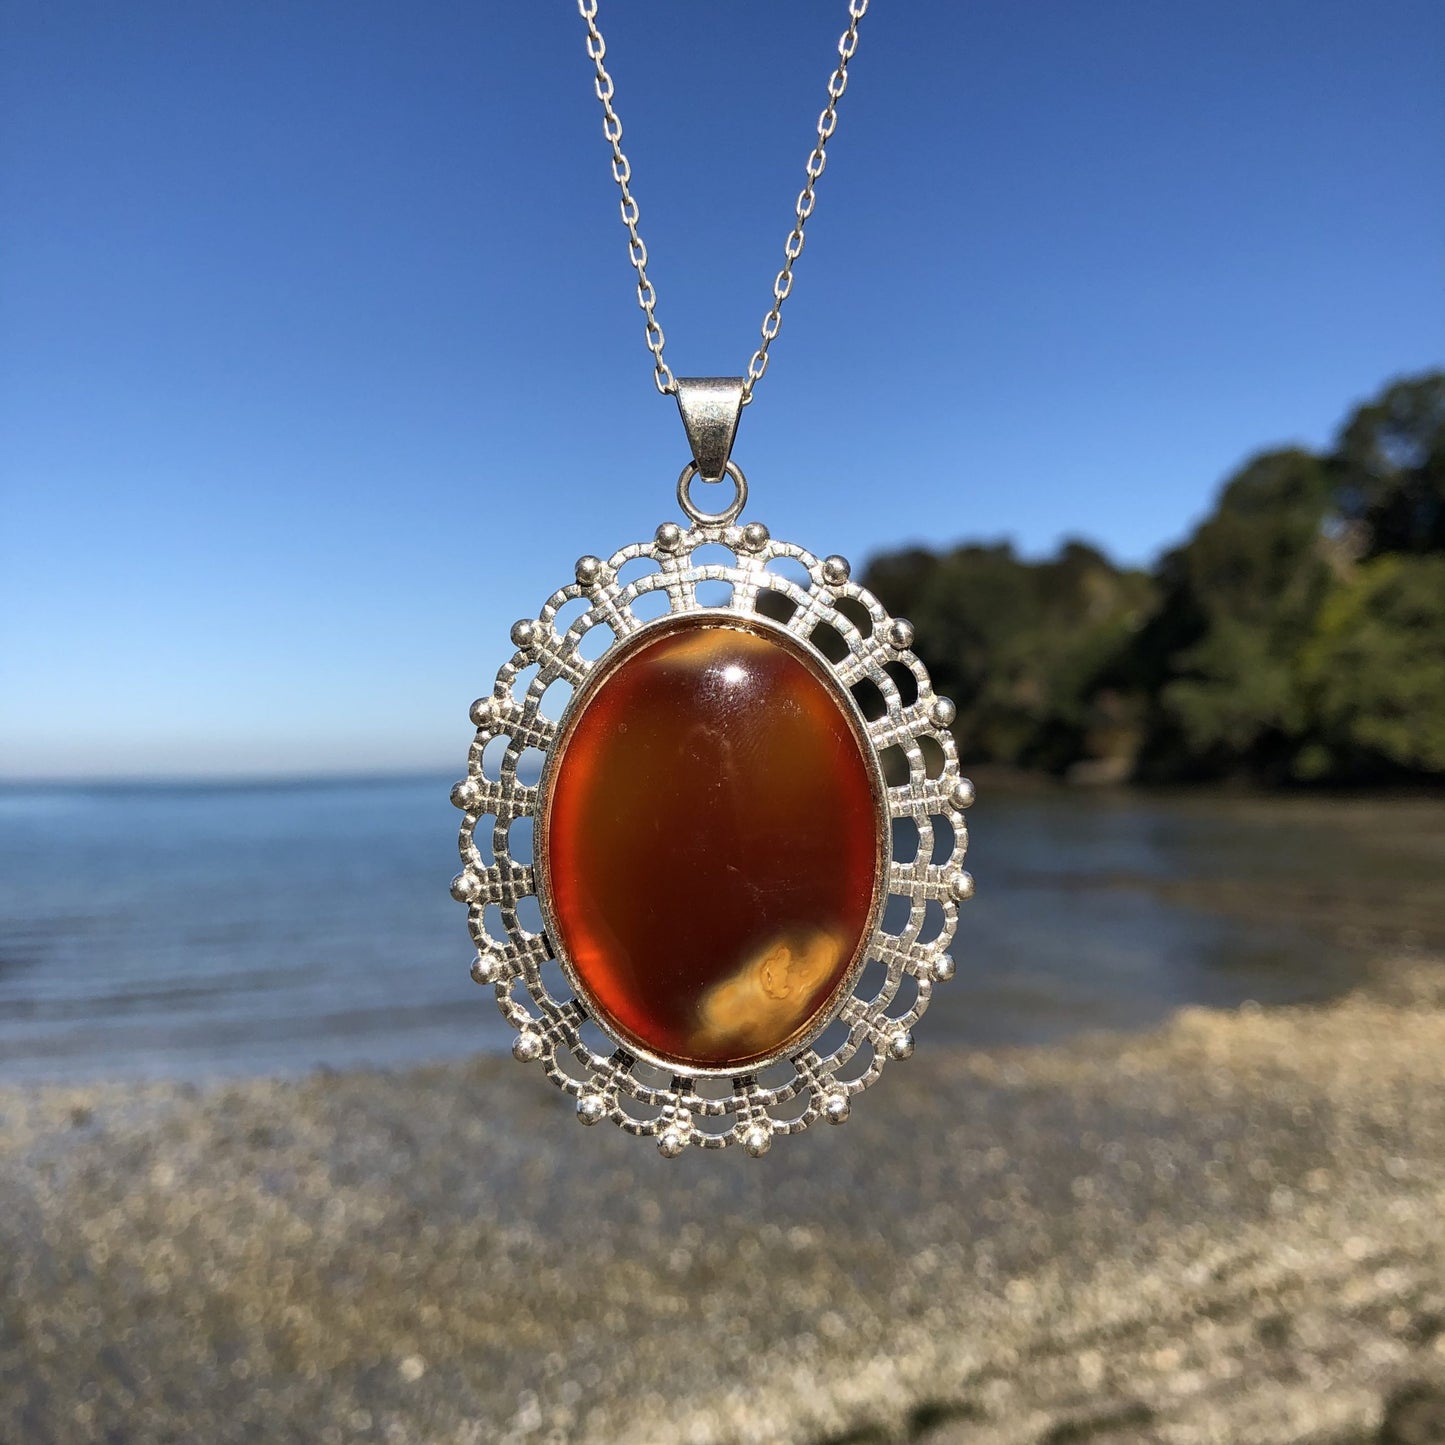 Necklace with large carnelian from Coromandel New Zealand with deep translucent orange color and side swirls of yellow/tan, hand polished to a 40x30mm cabochon and set in silver plated setting with 19 inch chain - on beach, front